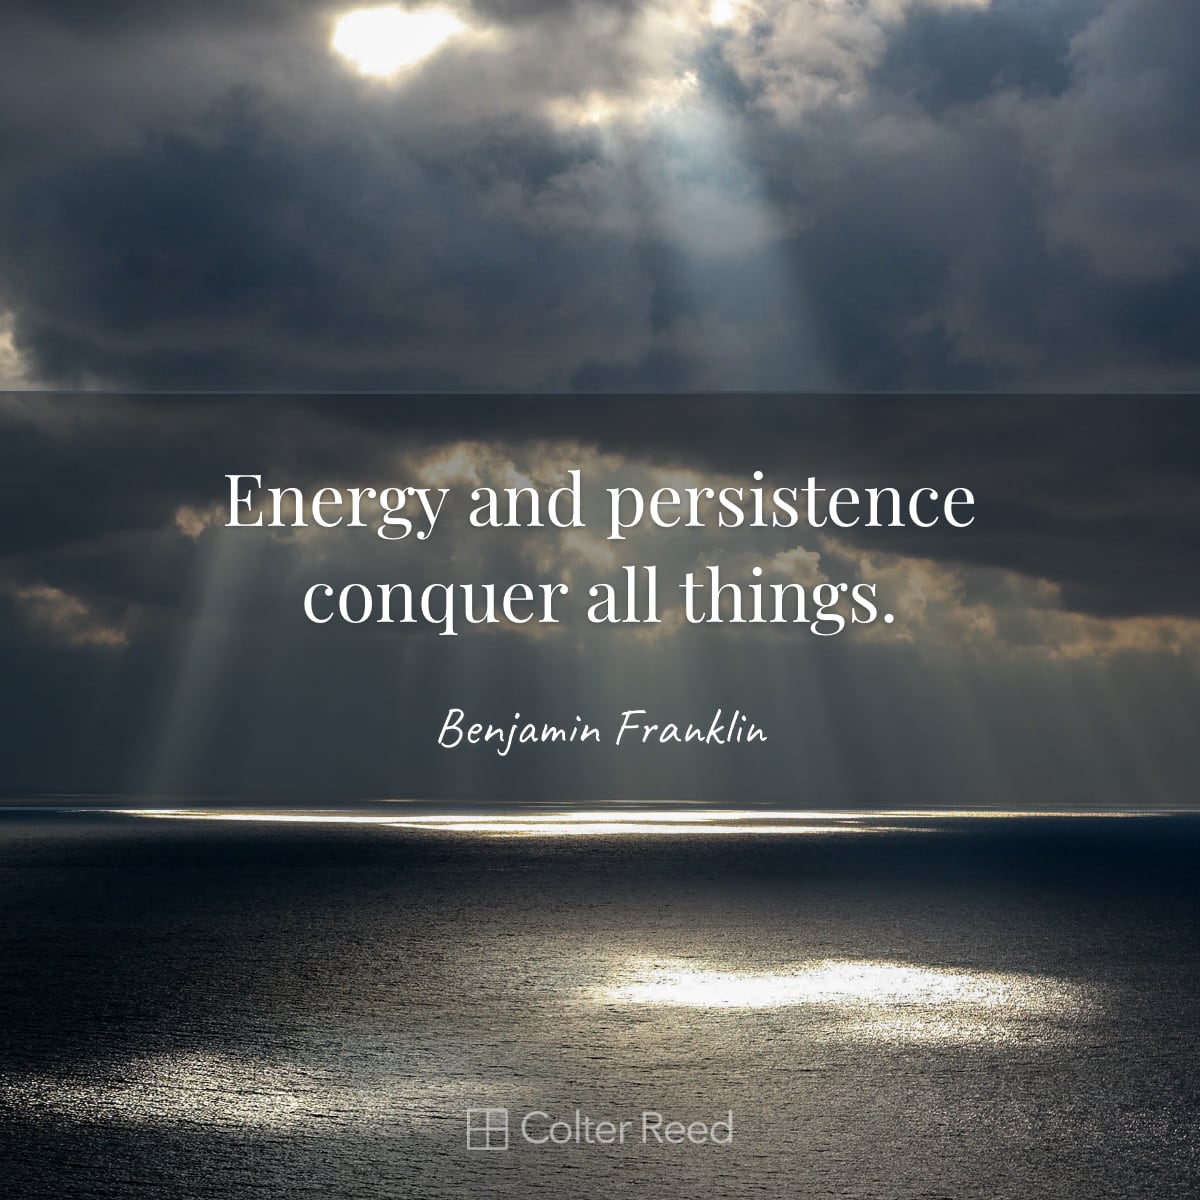 Energy and persistence conquer all things. —Benjamin Franklin